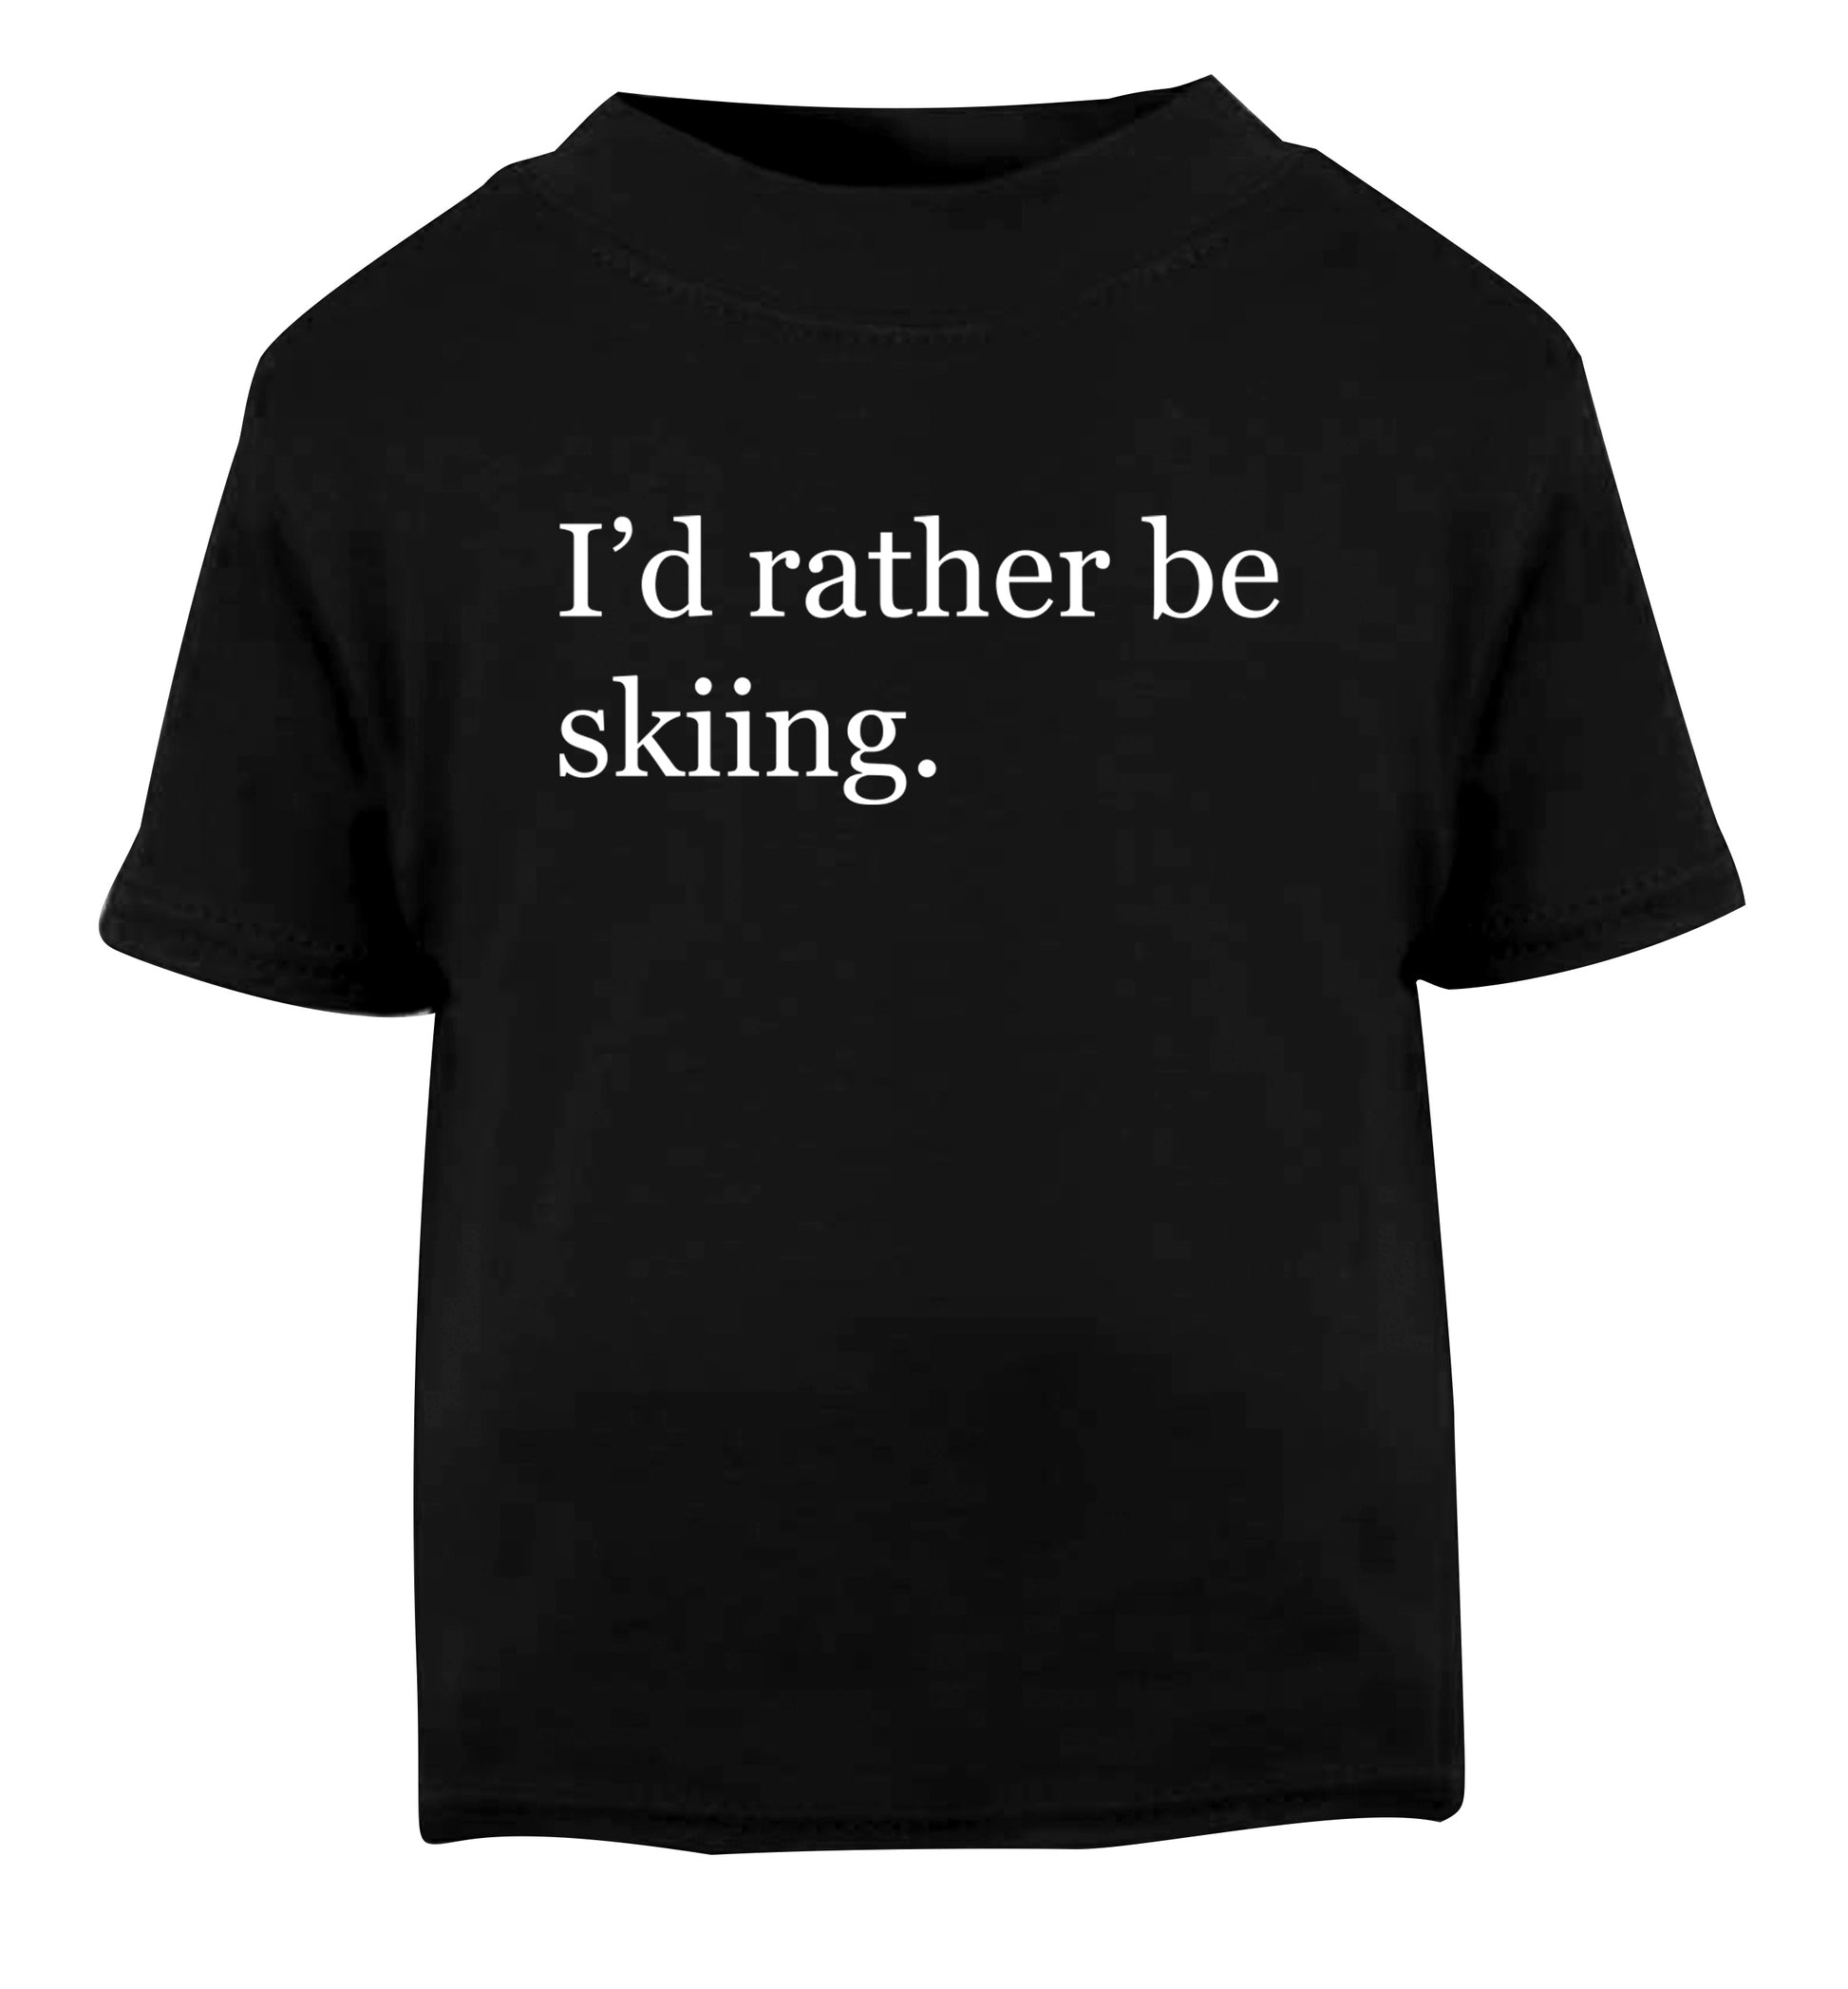 I'd rather be skiing Black Baby Toddler Tshirt 2 years